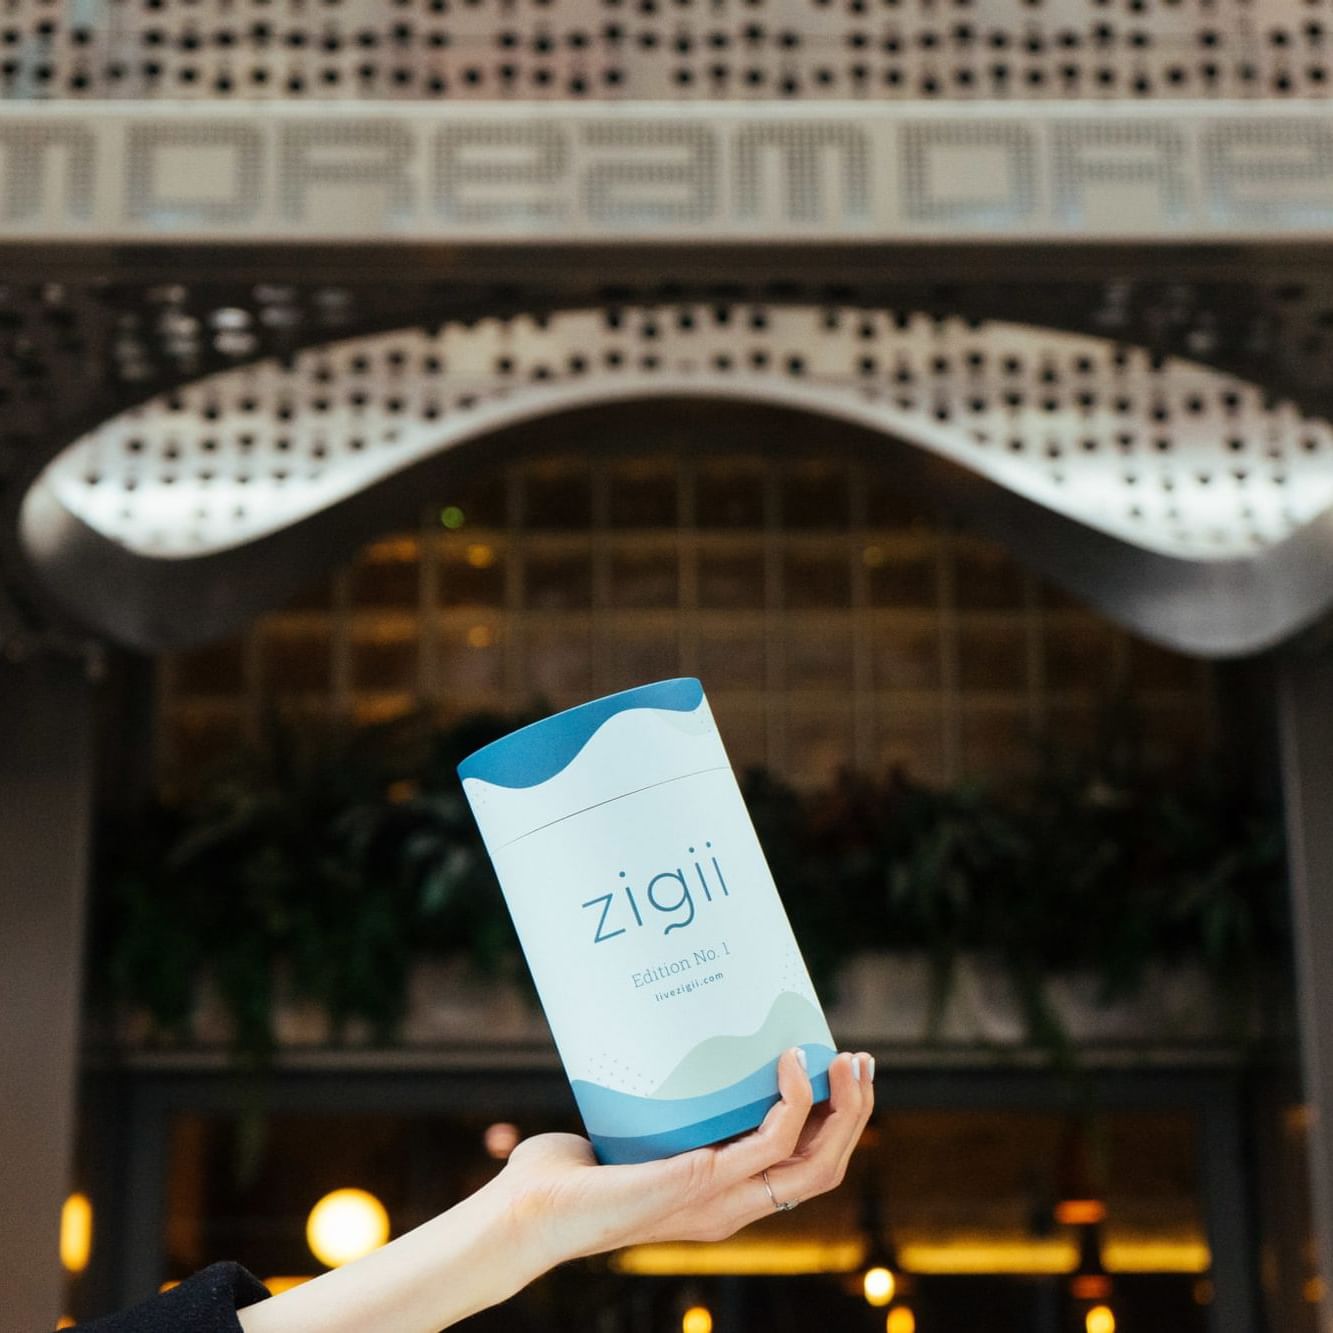 A bottle of 'zigii' on a women's hand with Dream Hotel view.